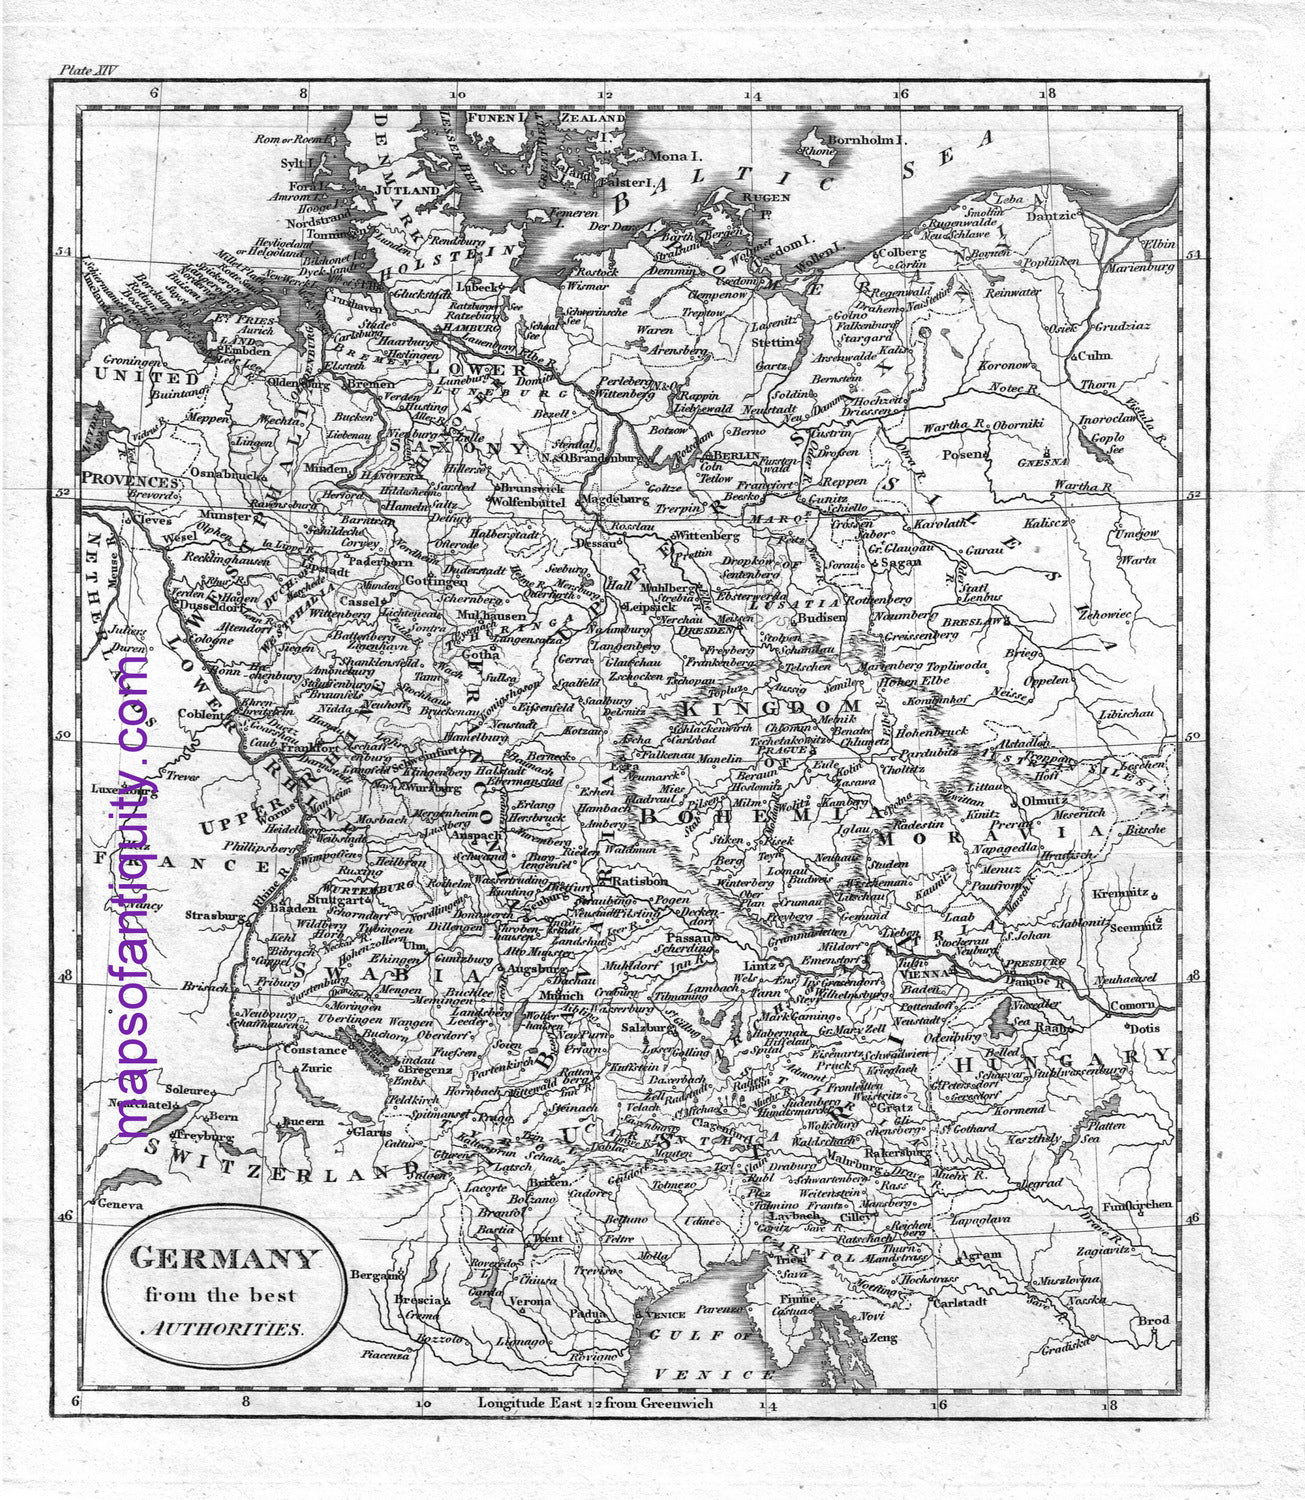 Black-and-white-antique-map-Germany-from-the-Best-Authorities-Europe-Germany-c.-1799-Russell-Maps-Of-Antiquity